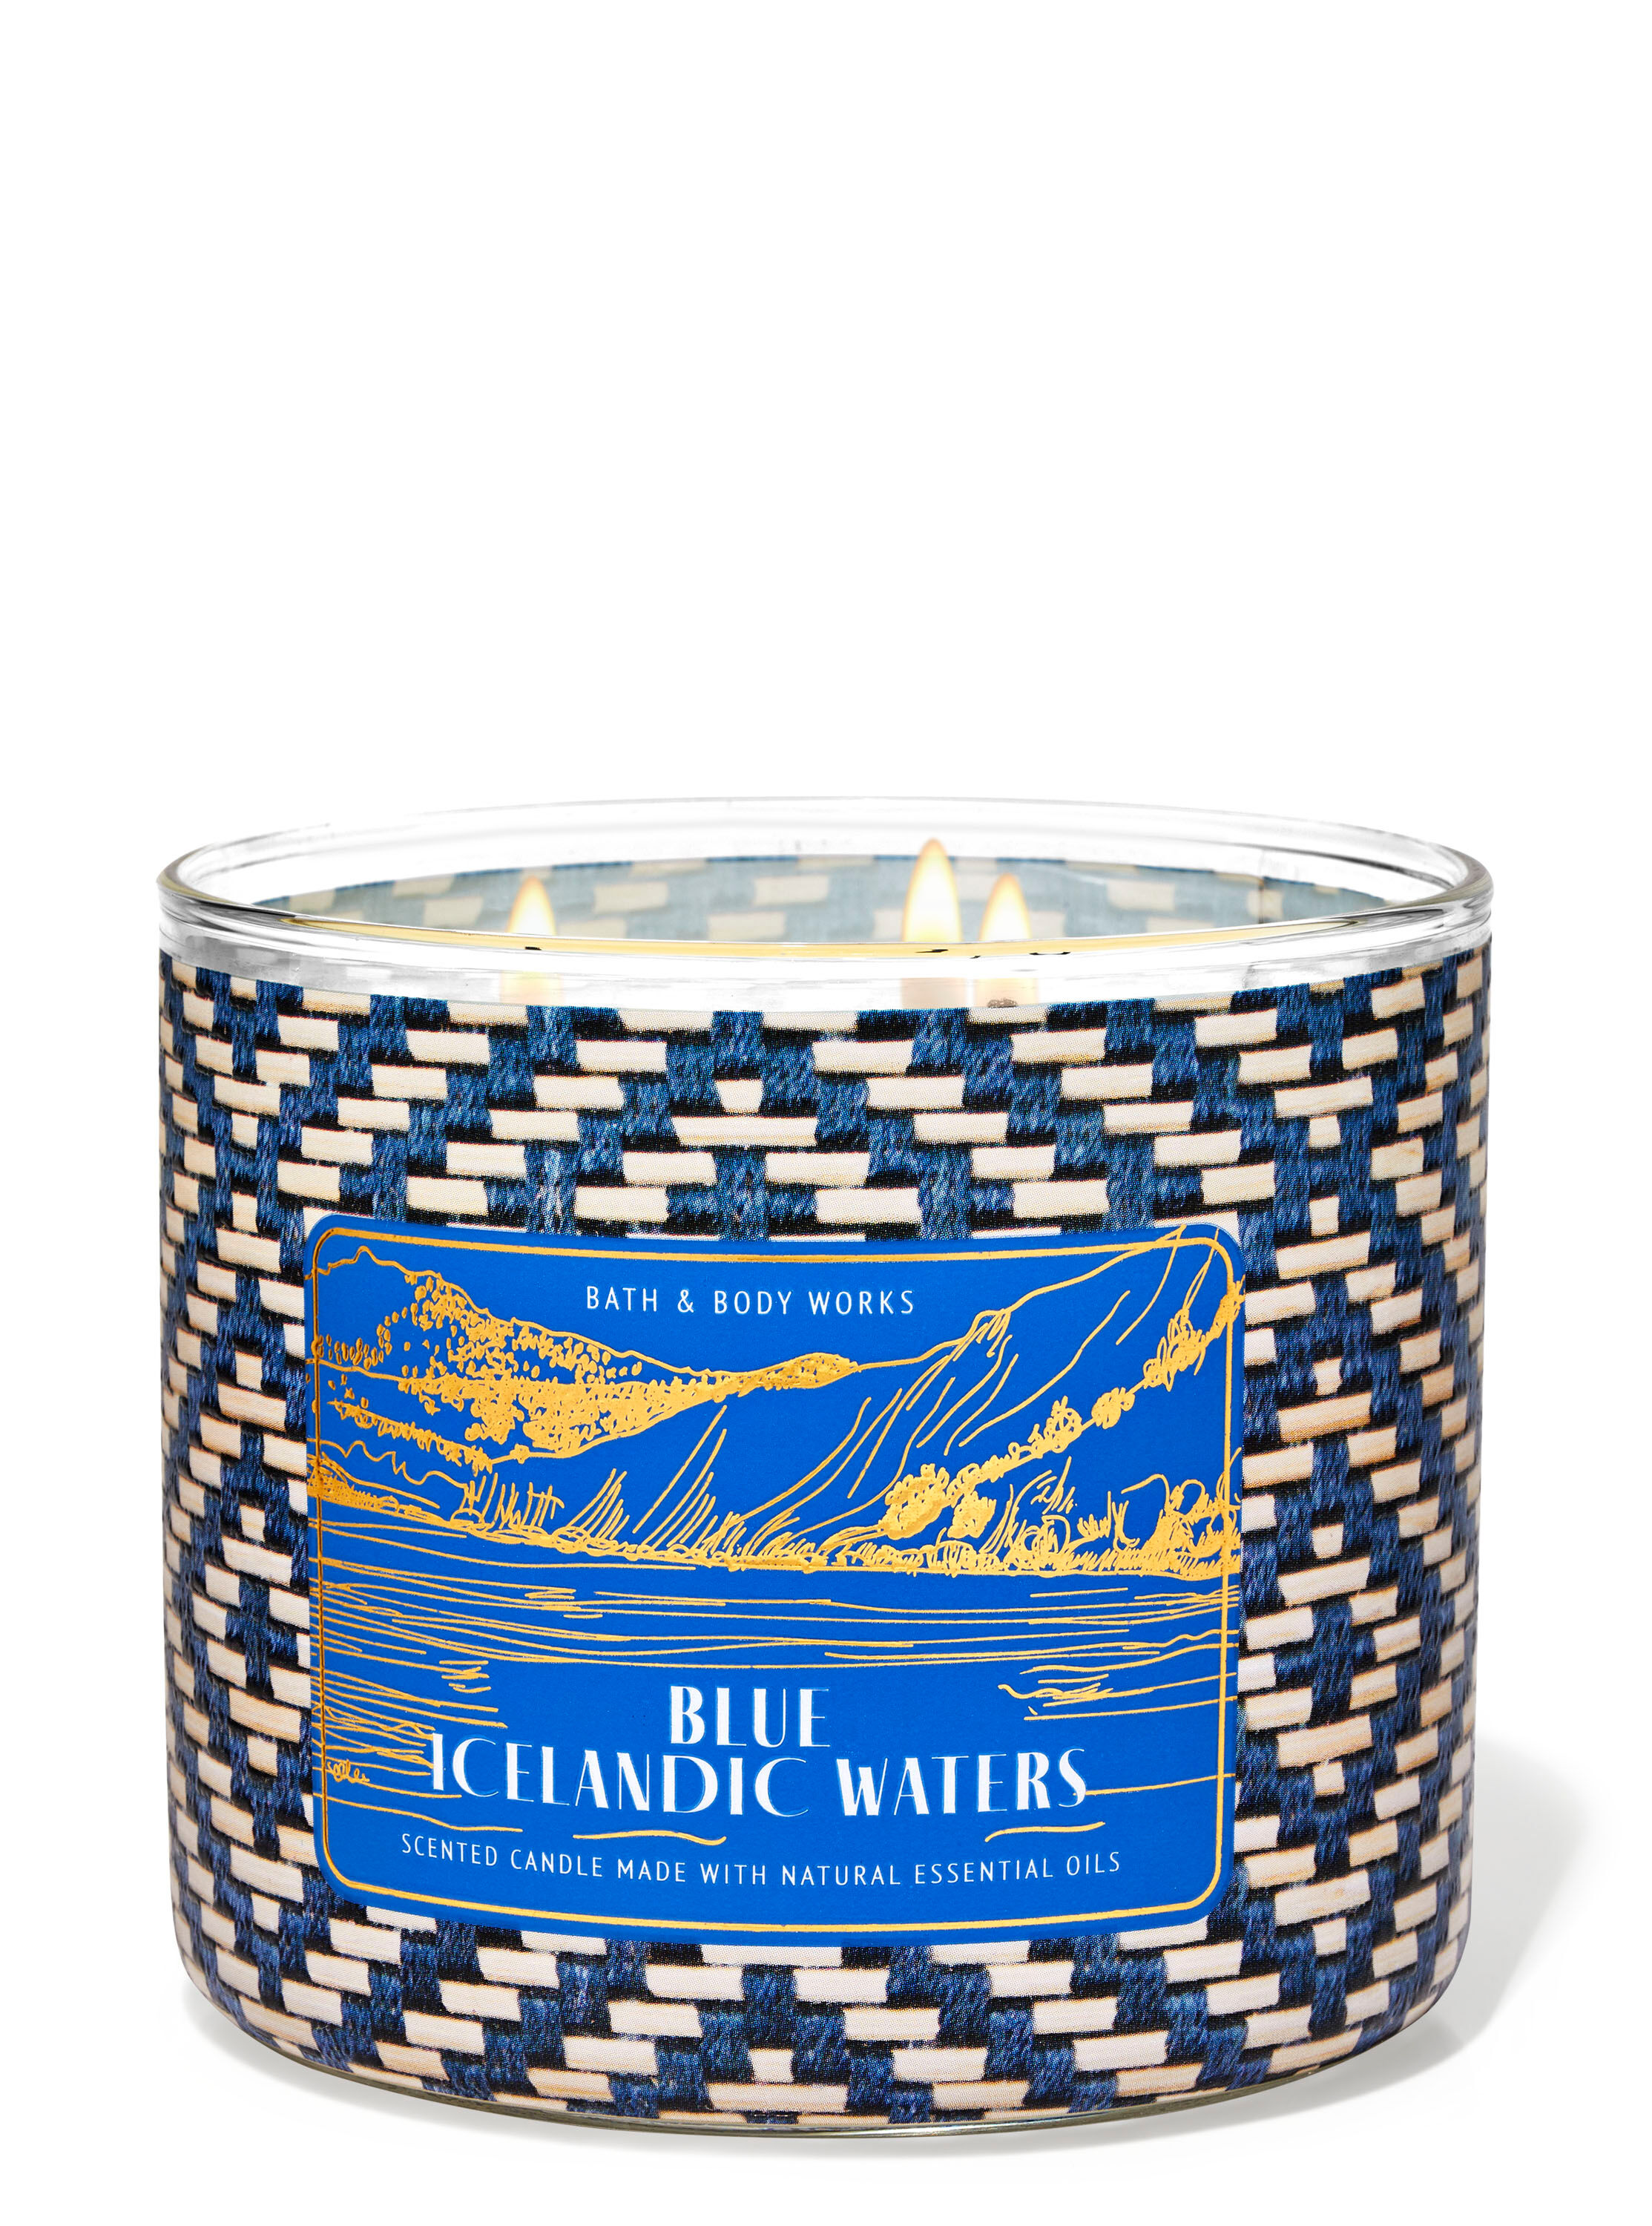 Blue Icelandic Waters 3-Wick Candle